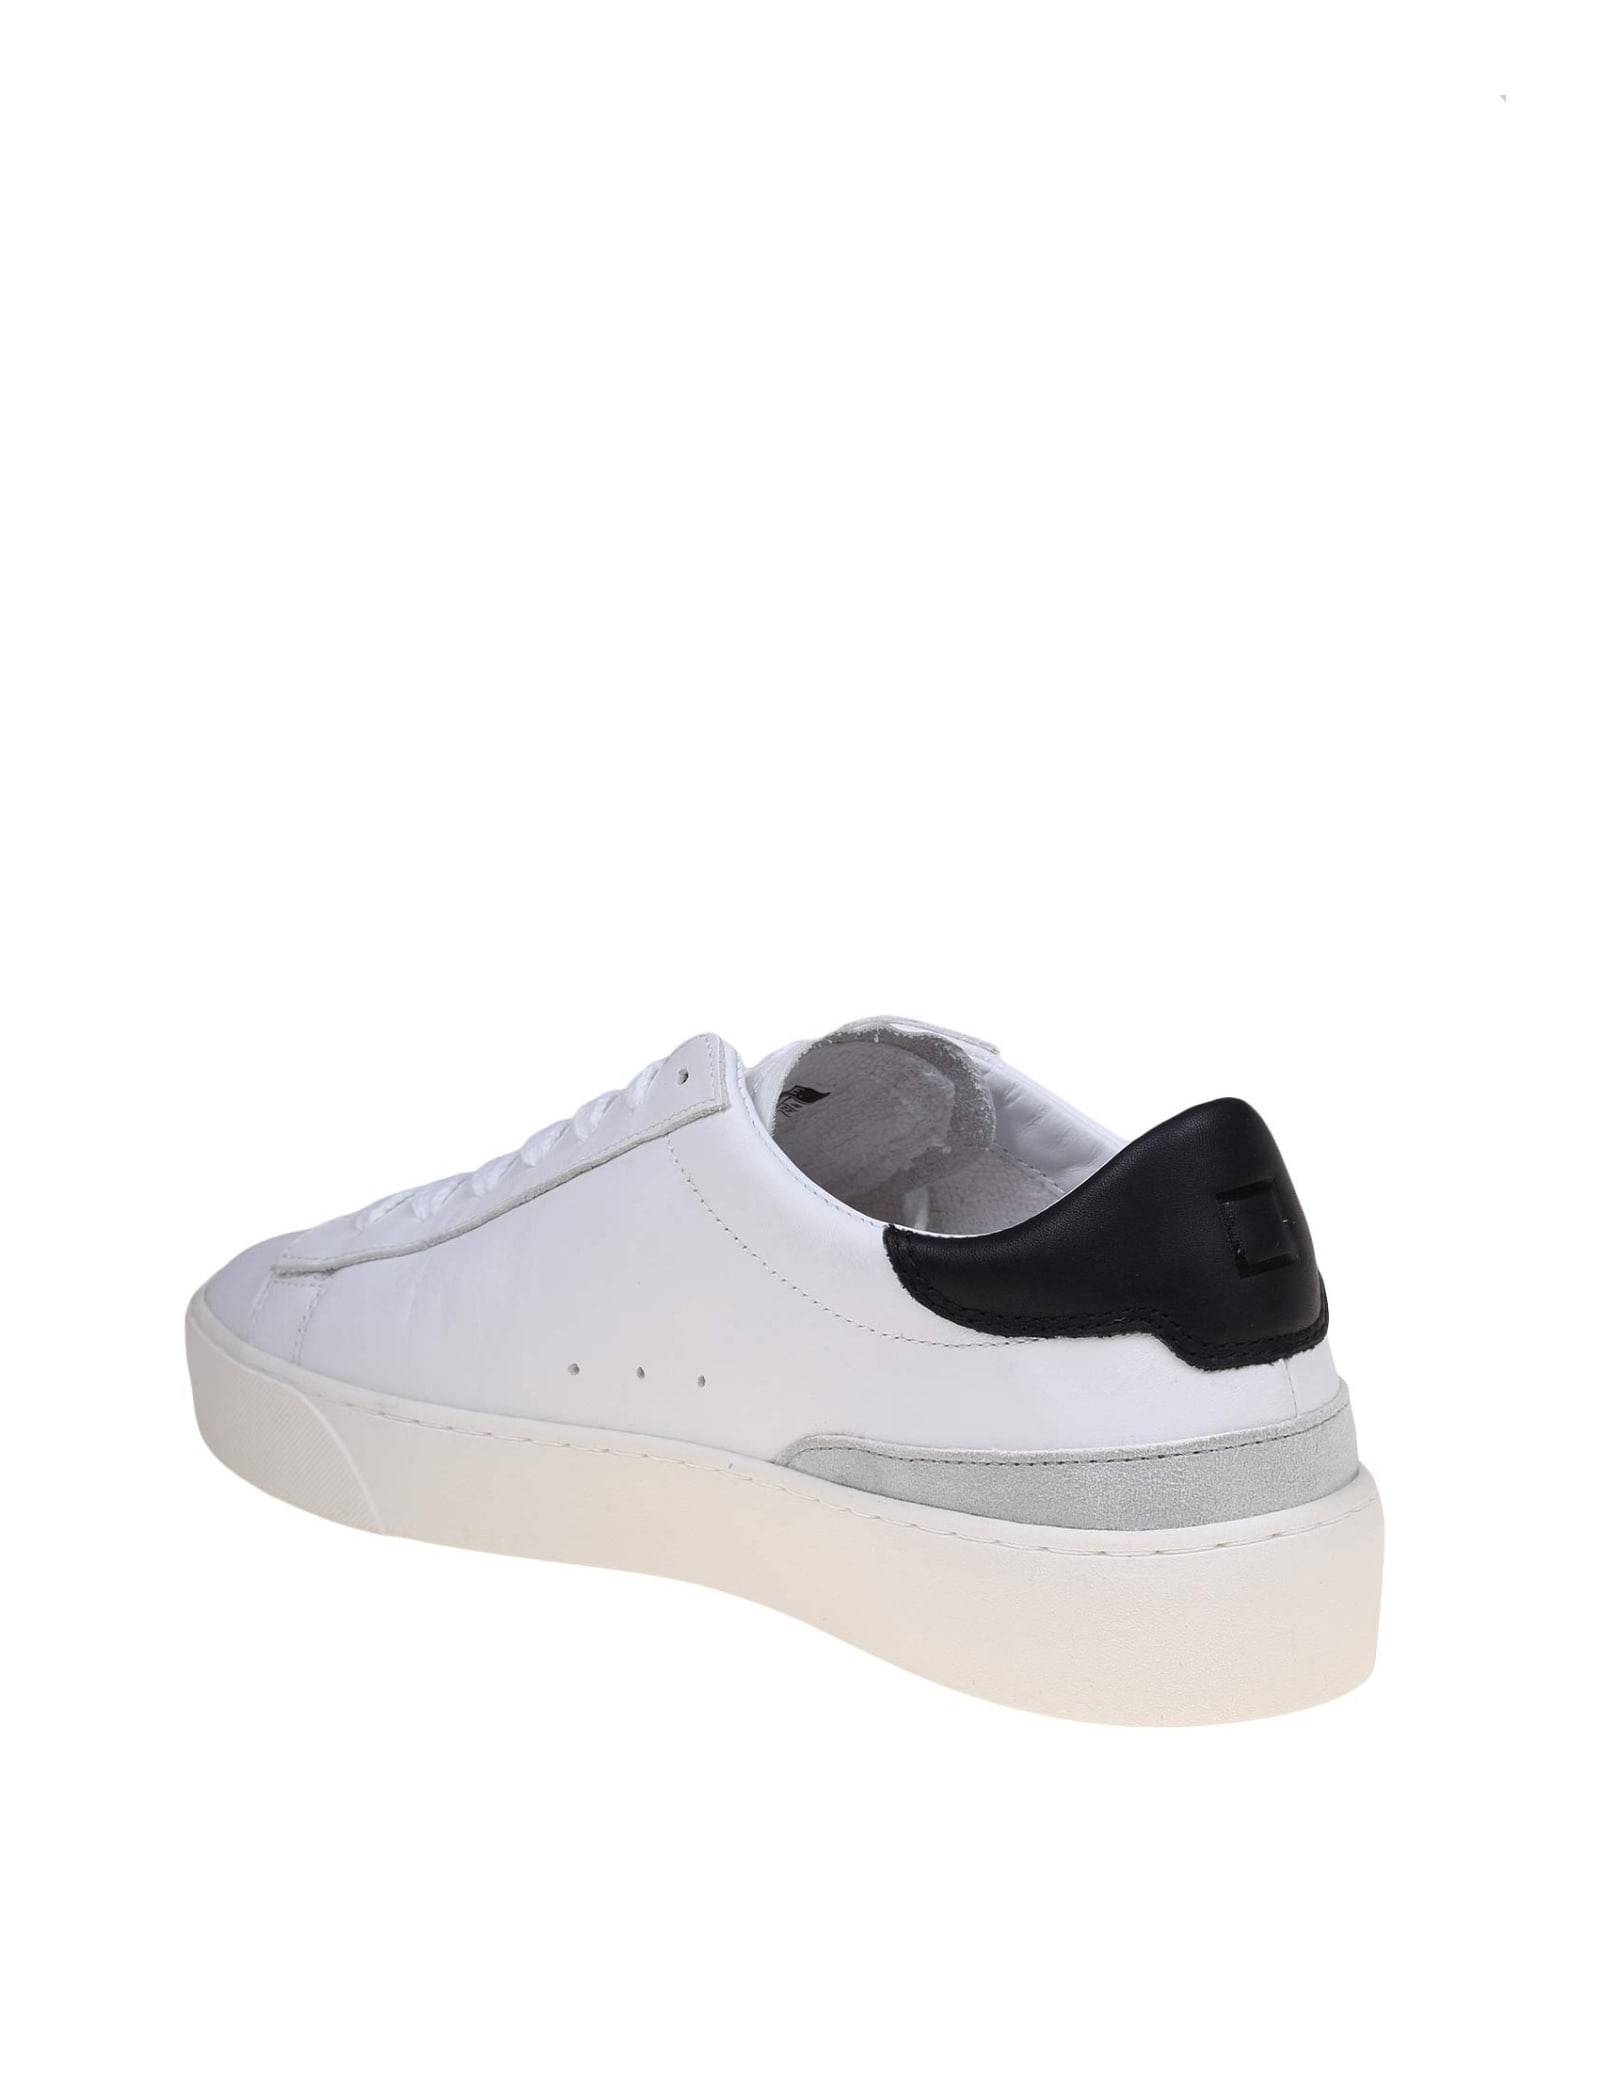 Shop Date Sonica Sneakers In White/black Leather